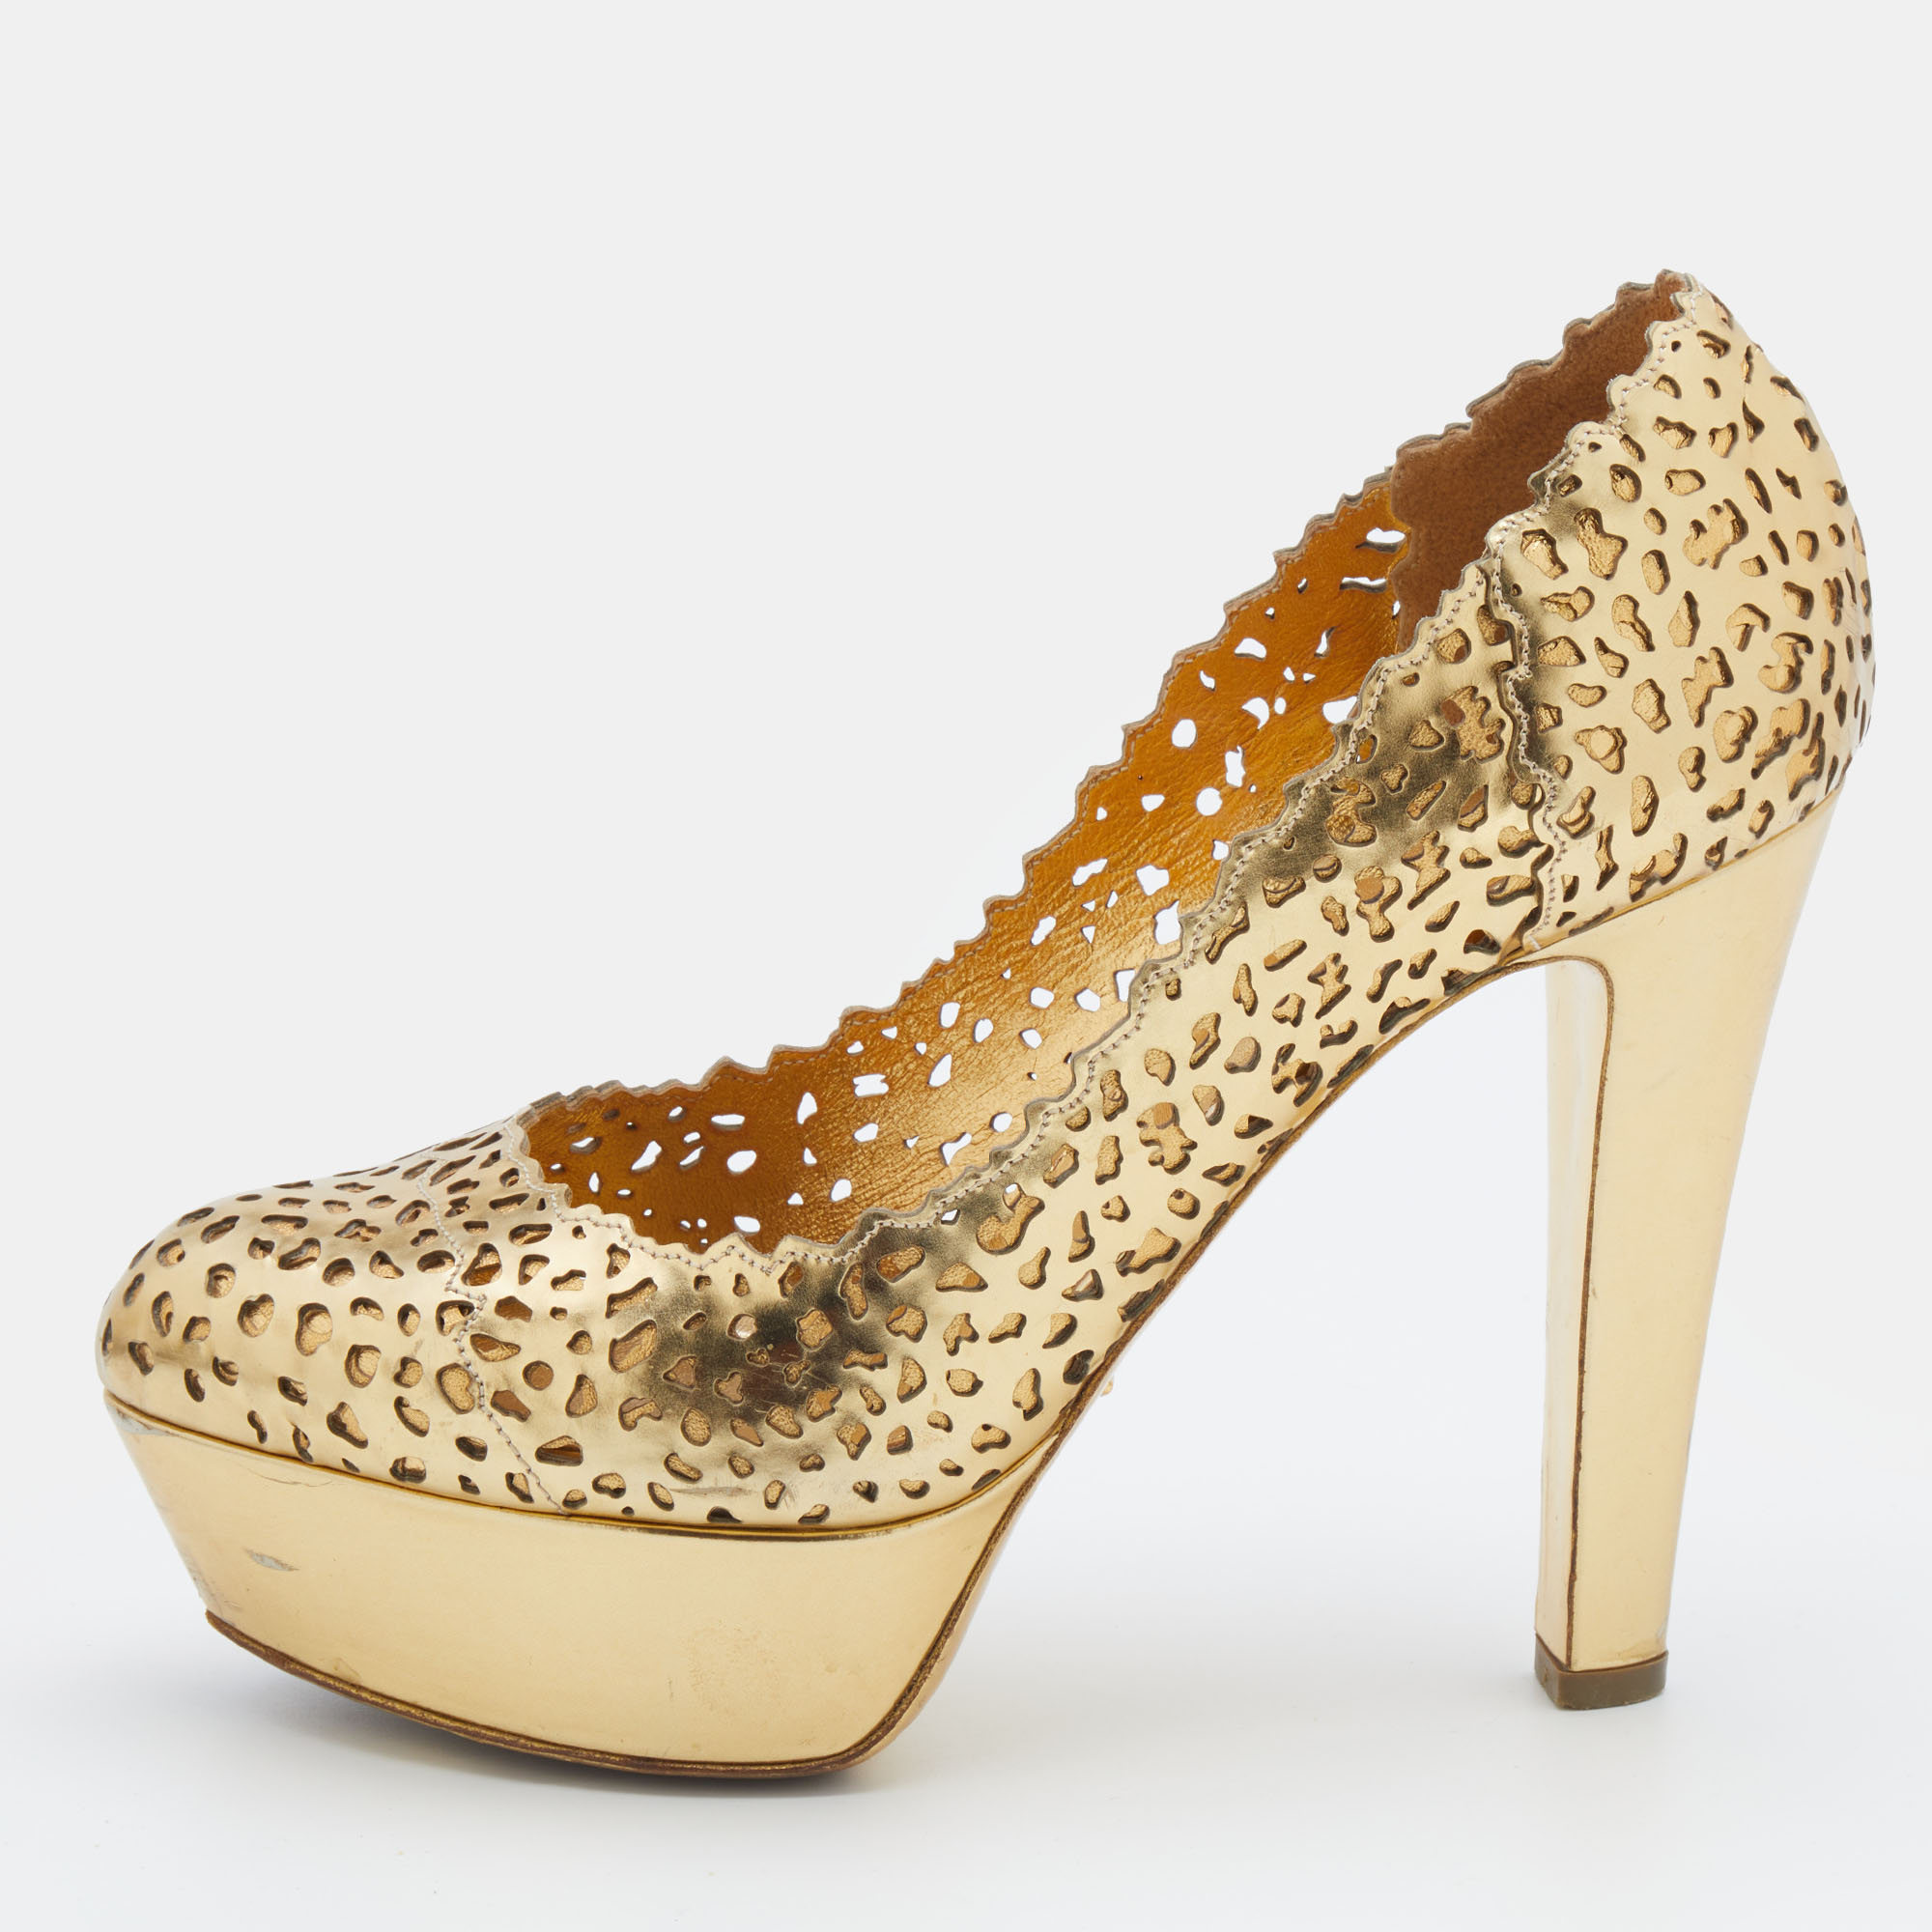 Adorned with intricate laser cuts this pair of Sergio Rossi pumps perfectly pairs fashion and function. It is crafted from leather in a metallic gold shade and it makes for a delightful creation. The 12cm heels and platforms of this pair will lend you stylish steps.